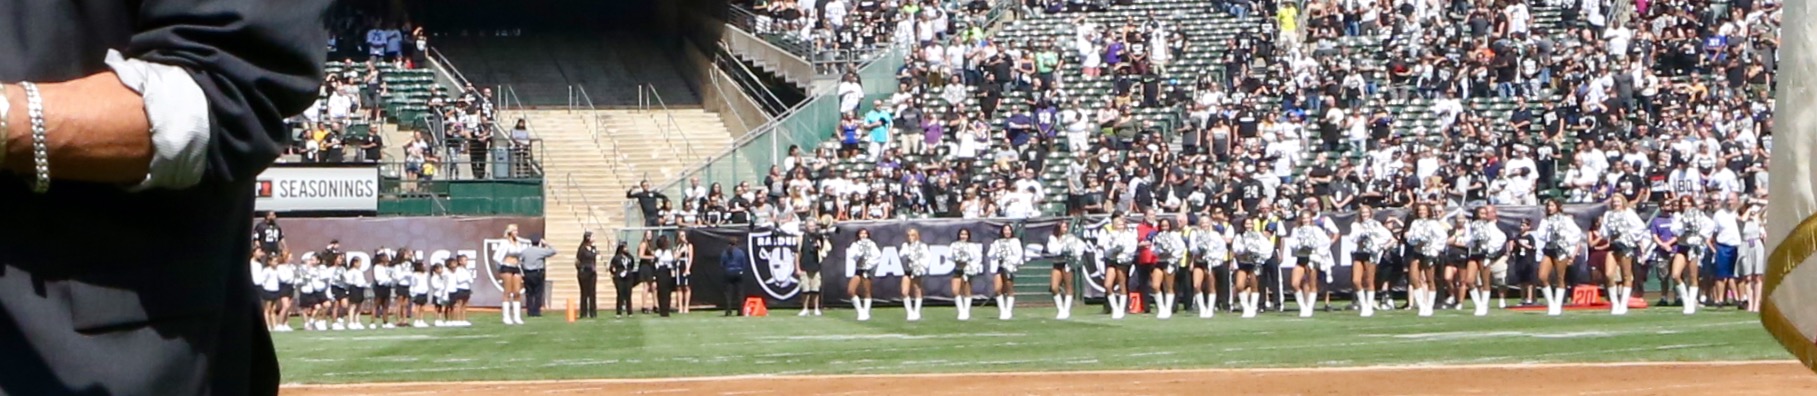 This is a photo of Craig Chiquico performing the National Anthem at The Oakland Raiders vs. Baltimore Ravens game, The Oakland Raiders won 37-33. The game was played at O.Co Coliseum in Oakland, California. September 22, 2015.